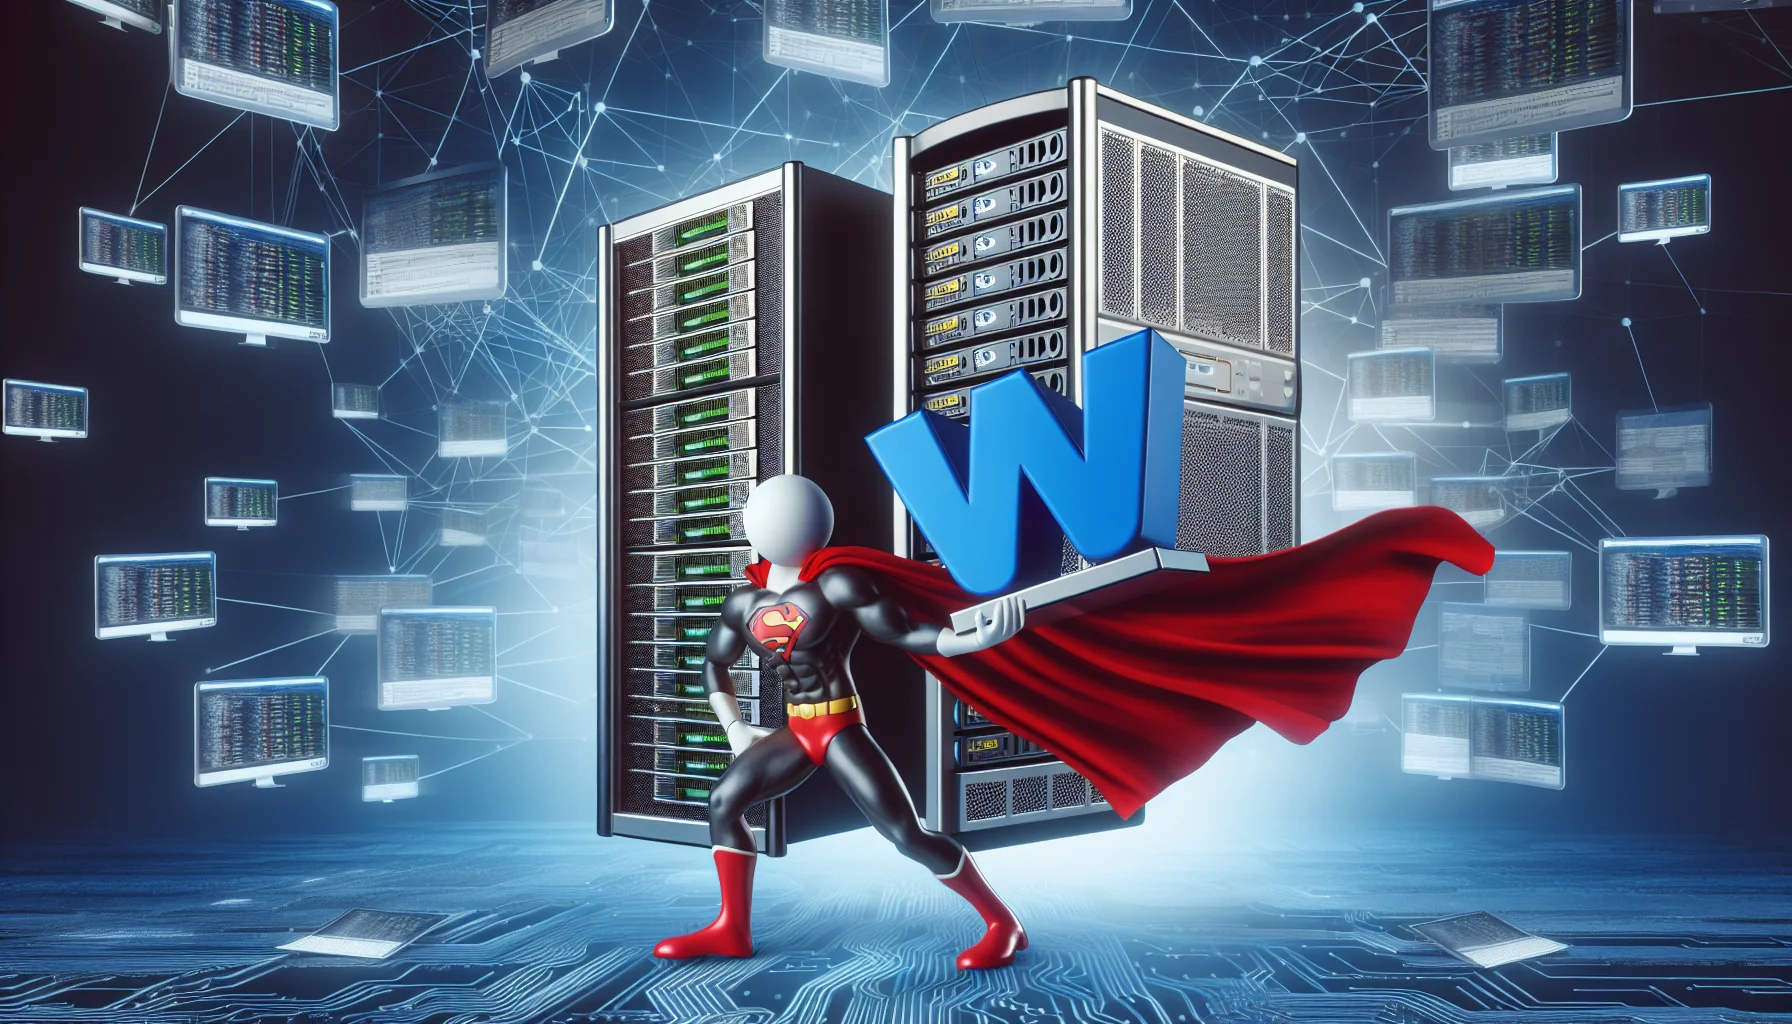 Create a humorous and appealing image showing a generic World Wide Web icon participating in an enticing scenario related to web hosting. Imagine the icon dramatically supporting a server rack, symbolizing it shoulders the burden of maintaining an online presence. Have it wearing a superhero cape, posing in front of a background filled with a complex network of wires and data flow. Remember to make it highly realistic and engaging, appealing to the web-savvy viewer.